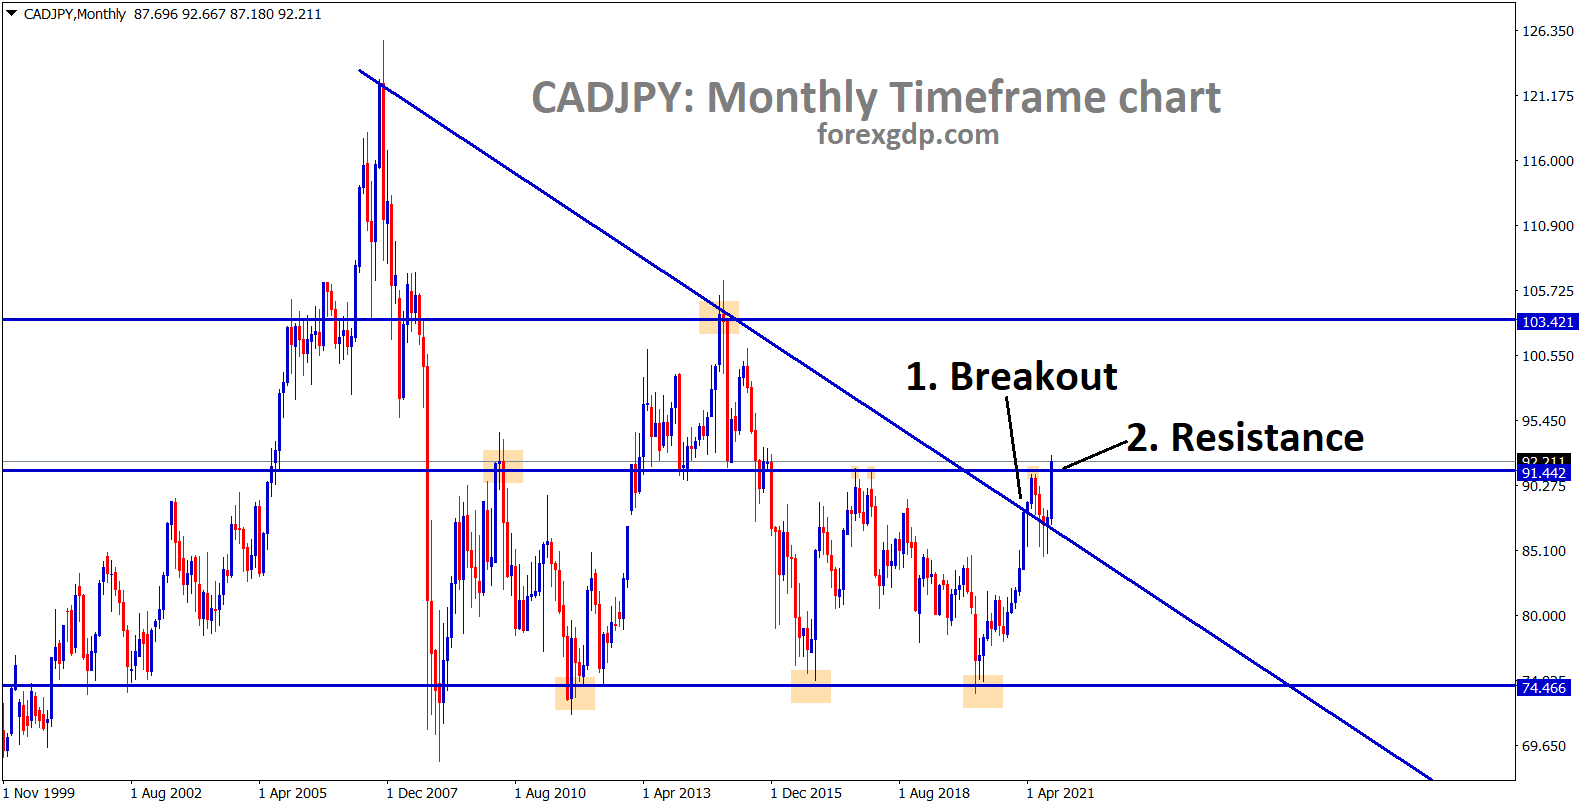 CADJPY has broken the top of the descending triangle and trying to break the horizontal resistance now